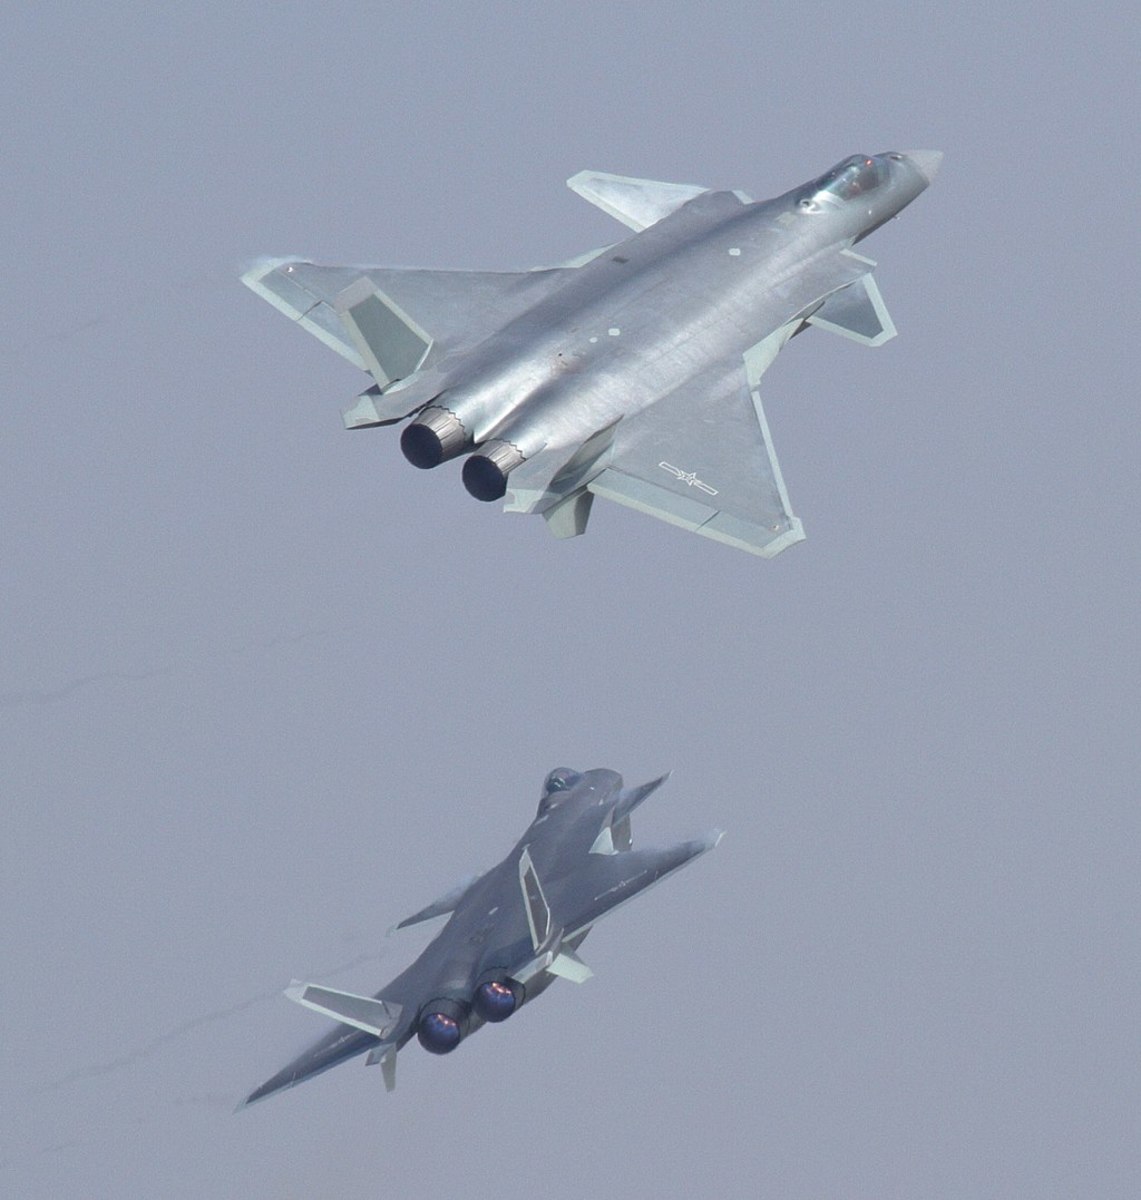 The two Chengdu J-20s making their first public appearance at Airshow China 2016